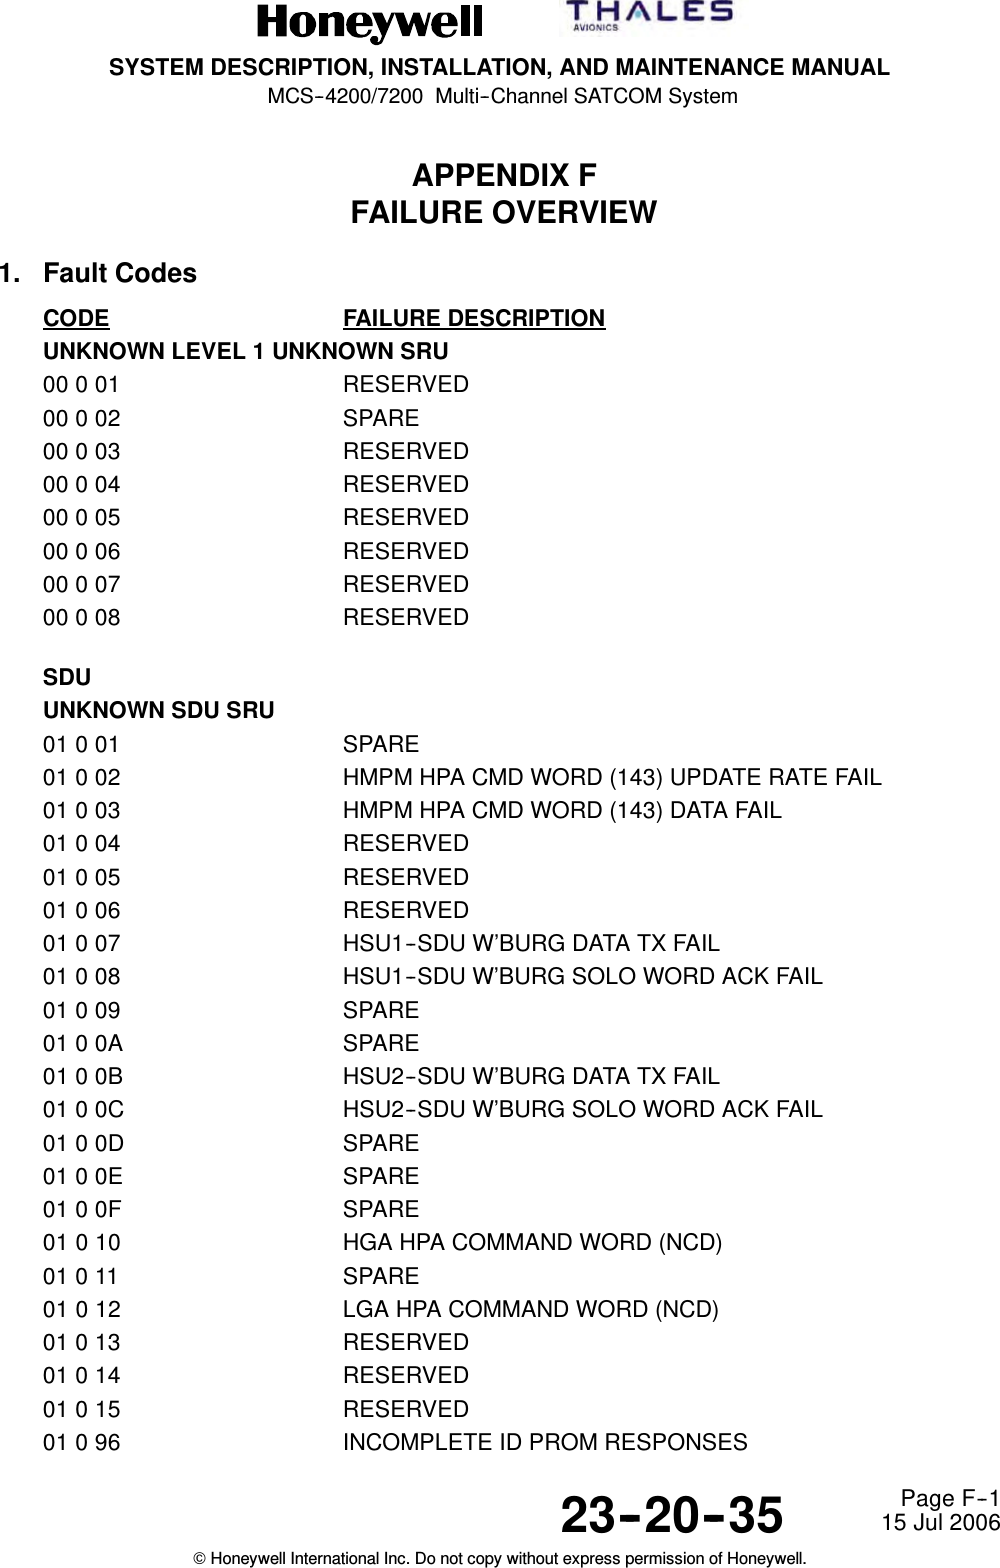 SYSTEM DESCRIPTION, INSTALLATION, AND MAINTENANCE MANUALMCS--4200/7200 Multi--Channel SATCOM System23--20--35 15 Jul 2006Honeywell International Inc. Do not copy without express permission of Honeywell.Page F--1APPENDIX FFAILURE OVERVIEW1. Fault CodesCODE FAILURE DESCRIPTIONUNKNOWN LEVEL 1 UNKNOWN SRU00 0 01 RESERVED00002 SPARE00 0 03 RESERVED00 0 04 RESERVED00 0 05 RESERVED00 0 06 RESERVED00 0 07 RESERVED00 0 08 RESERVEDSDUUNKNOWN SDU SRU01001 SPARE01 0 02 HMPM HPA CMD WORD (143) UPDATE RATE FAIL01 0 03 HMPM HPA CMD WORD (143) DATA FAIL01 0 04 RESERVED01 0 05 RESERVED01 0 06 RESERVED01 0 07 HSU1--SDU W’BURG DATA TX FAIL01 0 08 HSU1--SDU W’BURG SOLO WORD ACK FAIL01009 SPARE0100A SPARE01 0 0B HSU2--SDU W’BURG DATA TX FAIL01 0 0C HSU2--SDU W’BURG SOLO WORD ACK FAIL0100D SPARE0100E SPARE0100F SPARE01 0 10 HGA HPA COMMAND WORD (NCD)01011 SPARE01 0 12 LGA HPA COMMAND WORD (NCD)01 0 13 RESERVED01 0 14 RESERVED01 0 15 RESERVED01 0 96 INCOMPLETE ID PROM RESPONSES